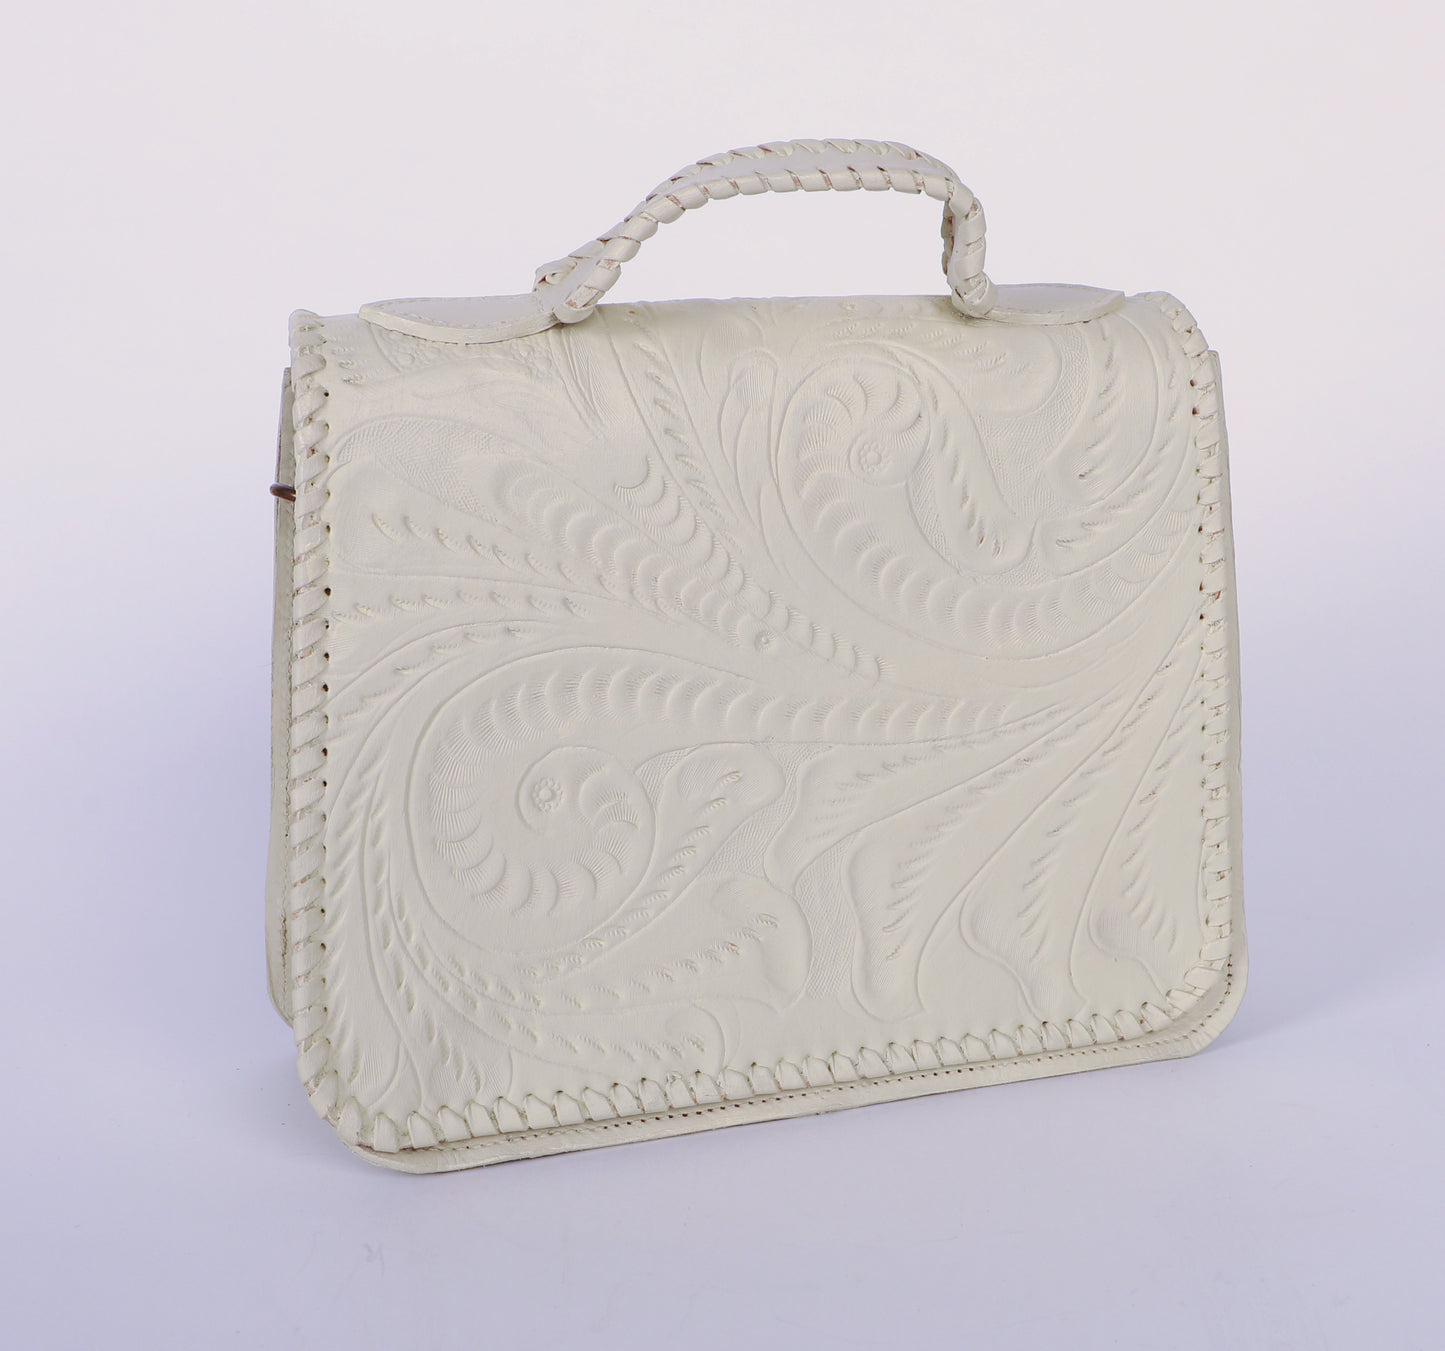 Medium-sized authentic leather handbag with a traditional mexican etching design on the upper flap. Braided handle on top. Fully lined with suede.  Front view in color white. 